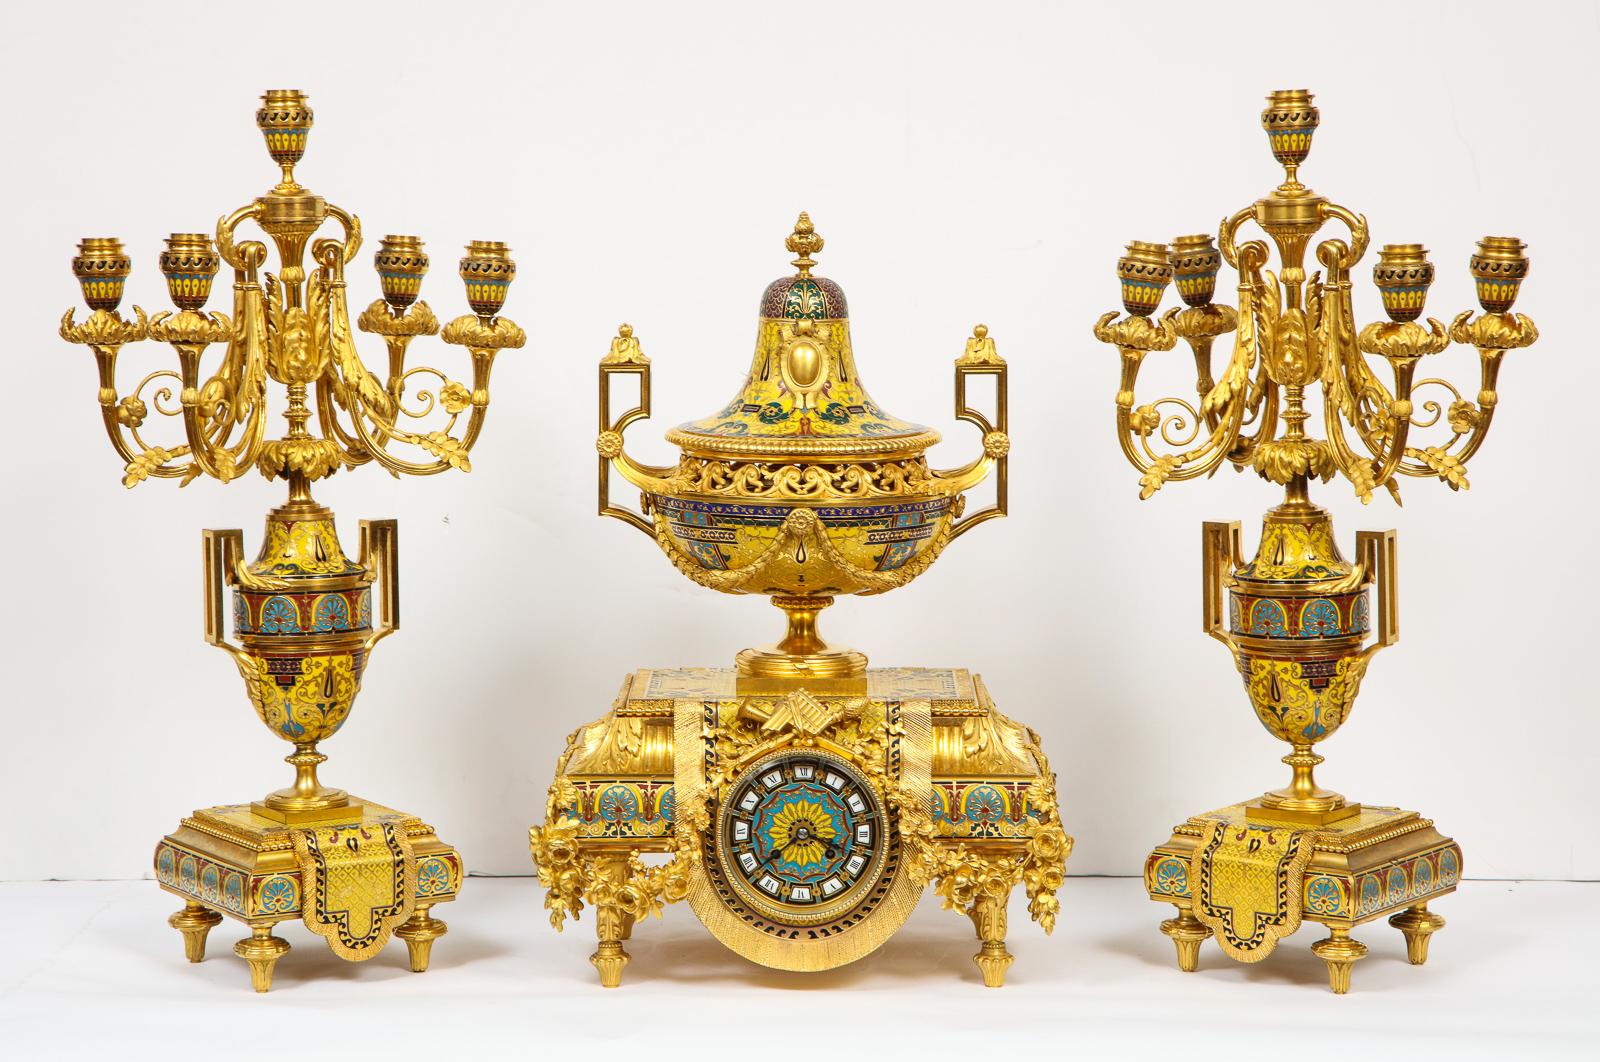 Ferdinand Barbedienne, A Museum Quality French Ormolu Champleve Enamel three-piece Clock Set Garniture.

Comprising of a clock and a pair of Candelabra, with the highest quality French ormolu or bronze and champleve cloisonne enamel.

The clock in